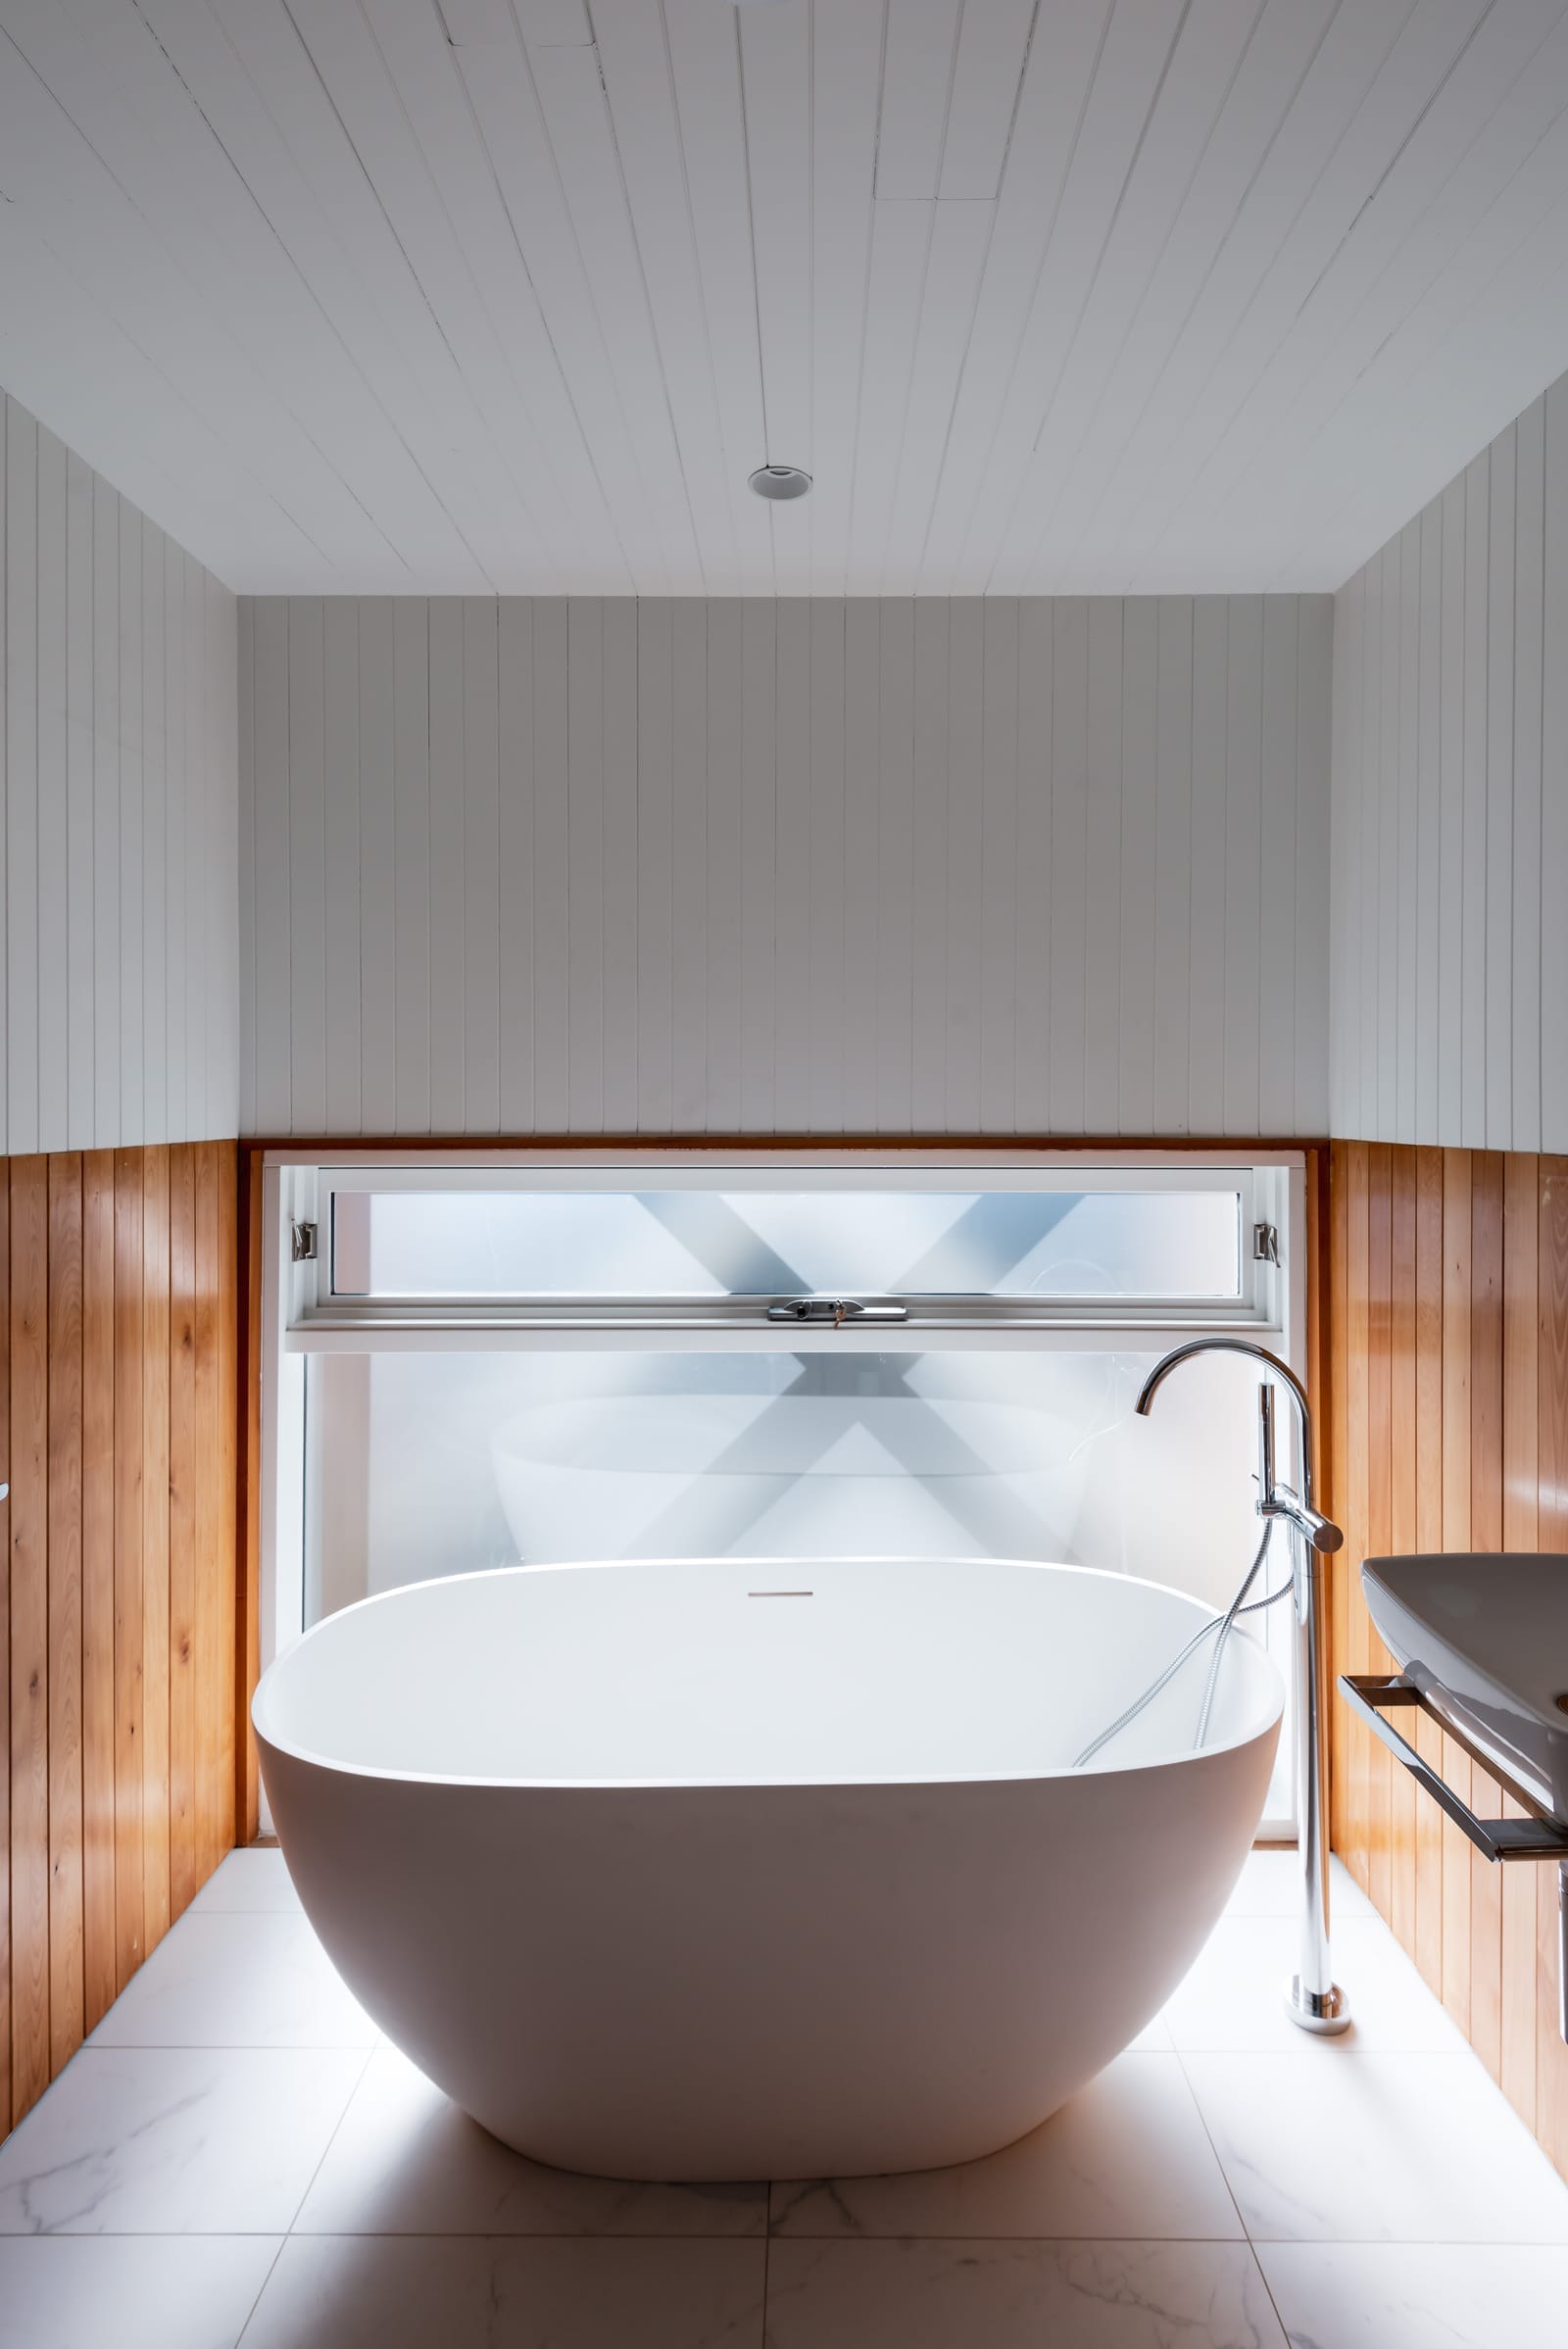 Wattle Bird House by Flett Architecture. Photography by Matt Sansom. Round freestanding bath on white marble floor. Timber and white paneled walls.